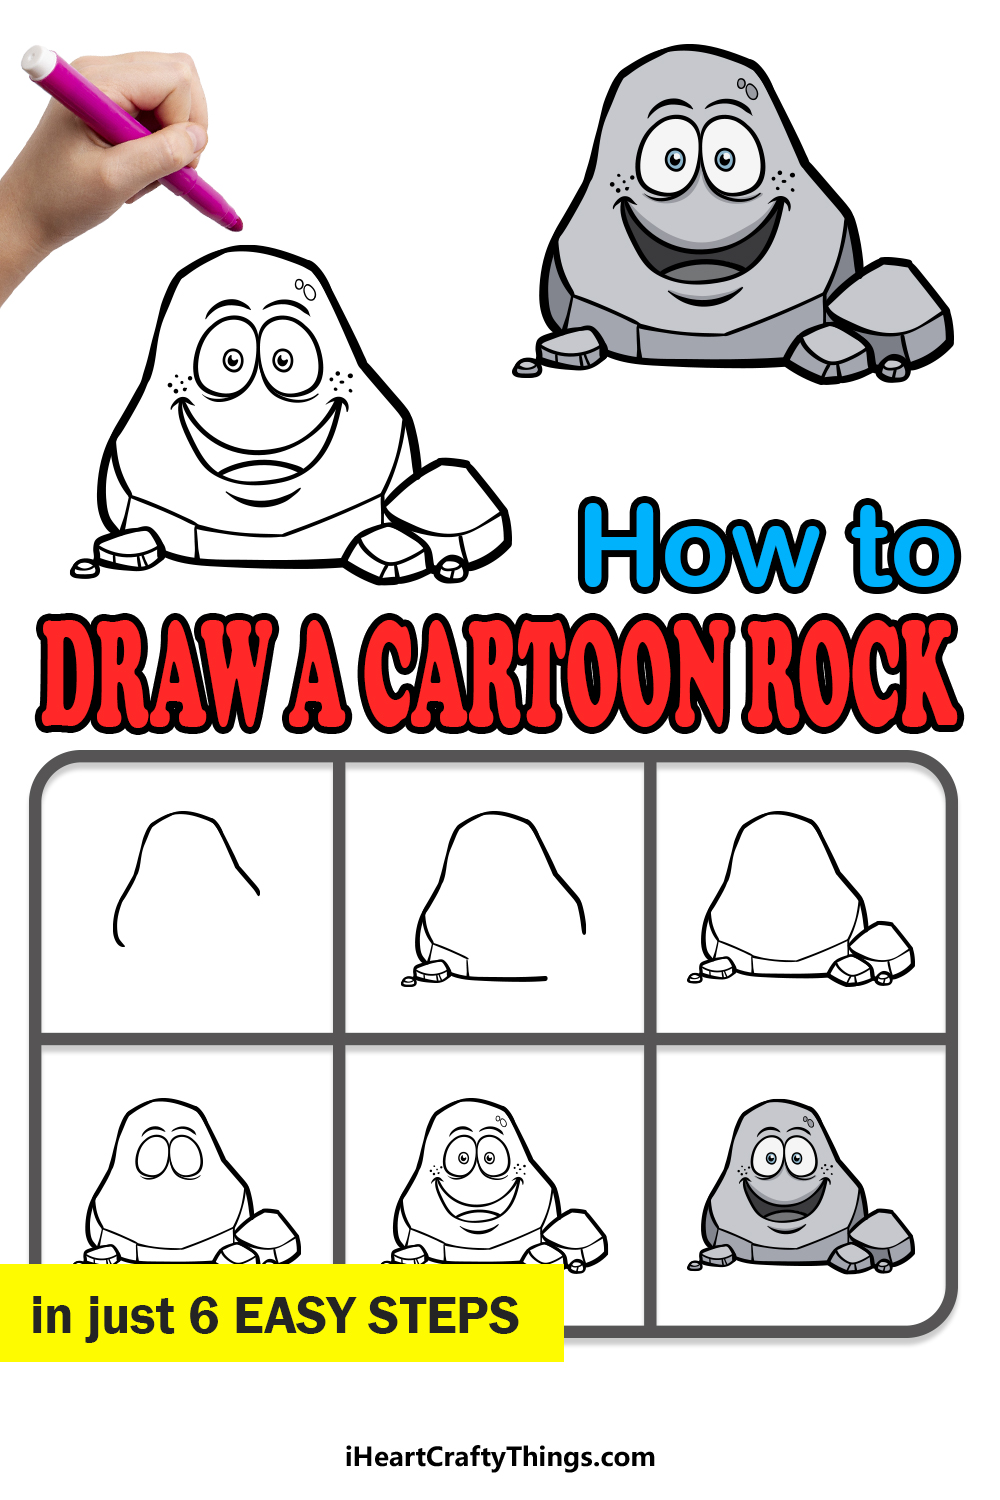 how to draw a cartoon rock in 6 easy steps